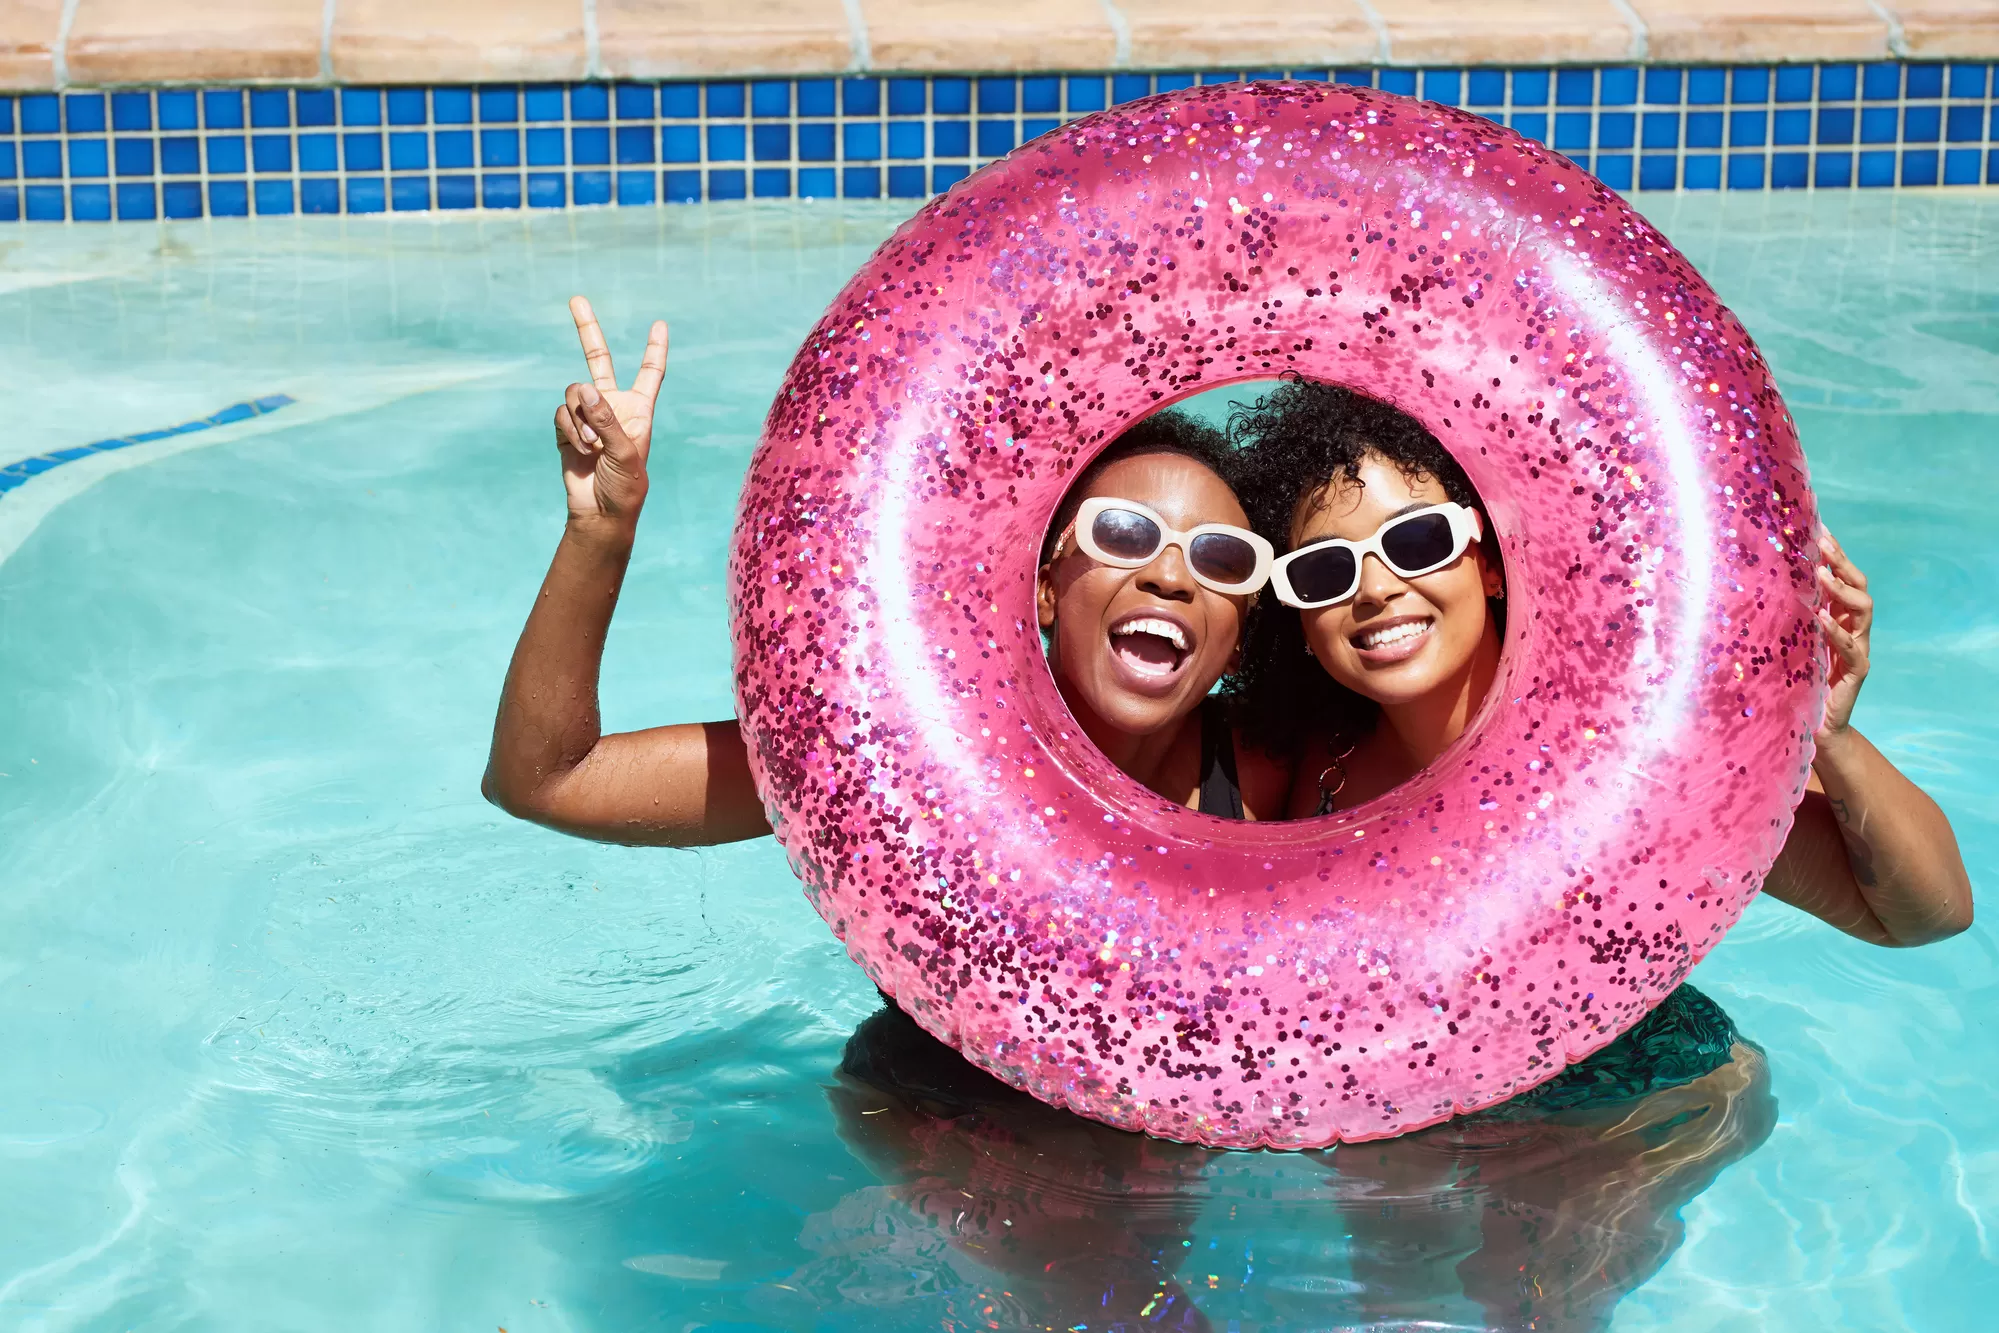 Two women in a pool with a pink floatie